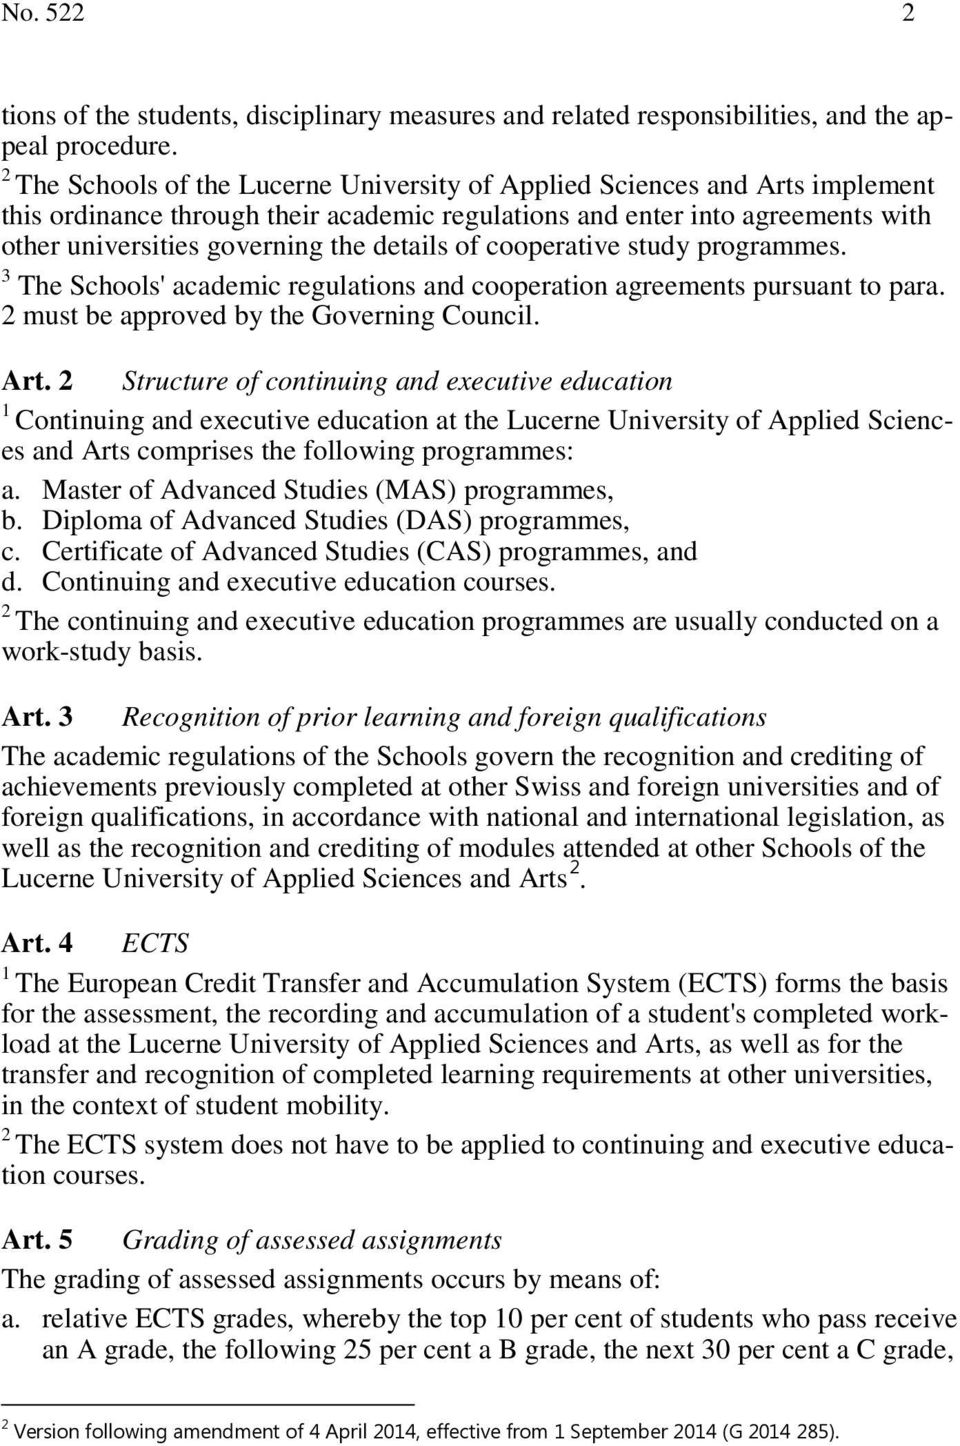 of cooperative study programmes. The Schools' academic regulations and cooperation agreements pursuant to para. must be approved by the Governing Council. Art.